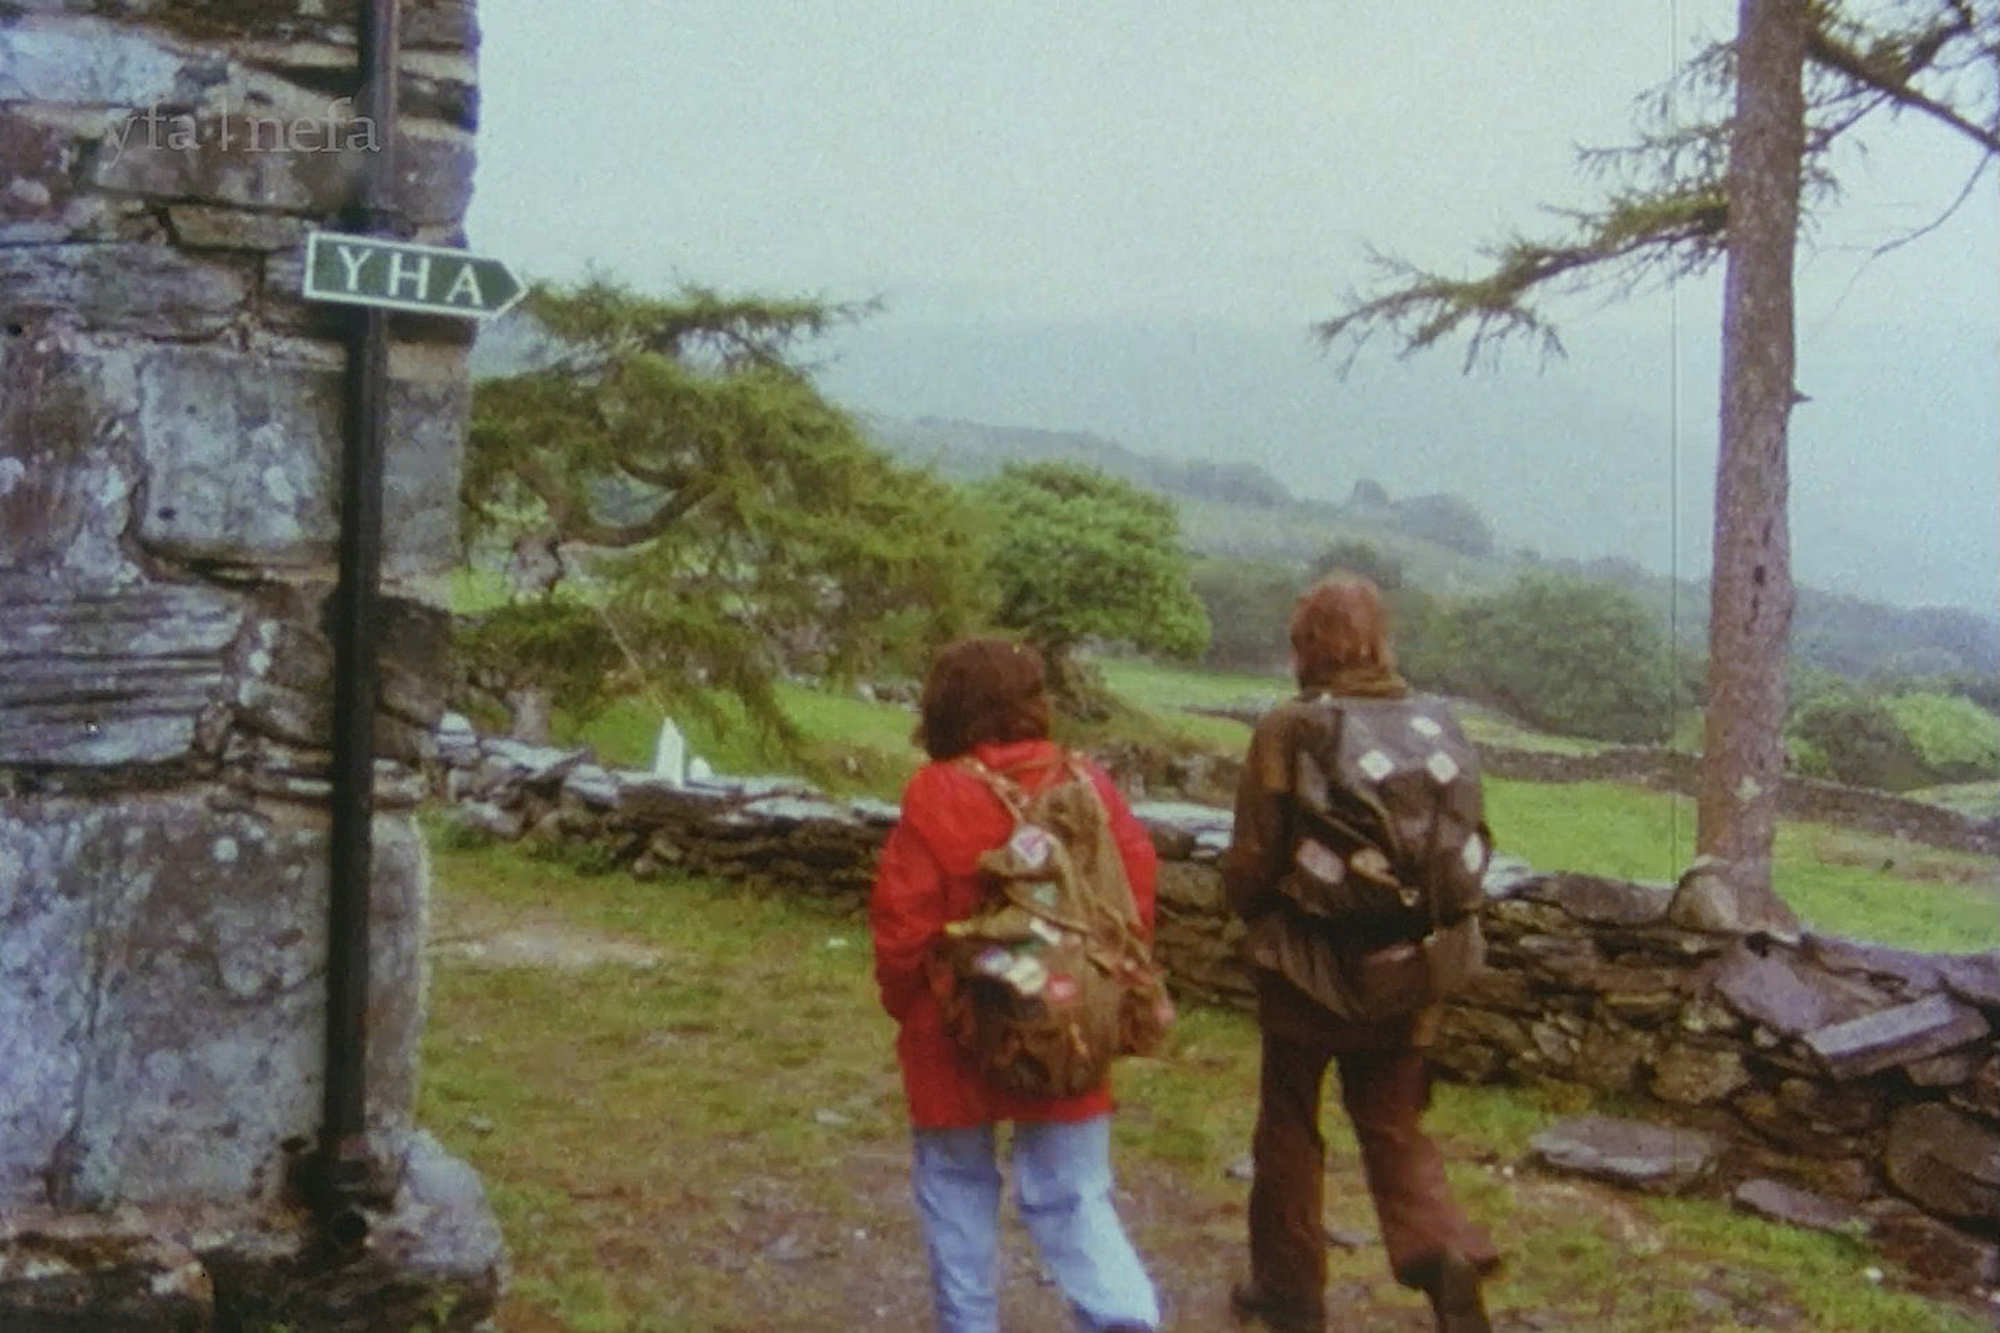 Two walkers in the YHA film archive